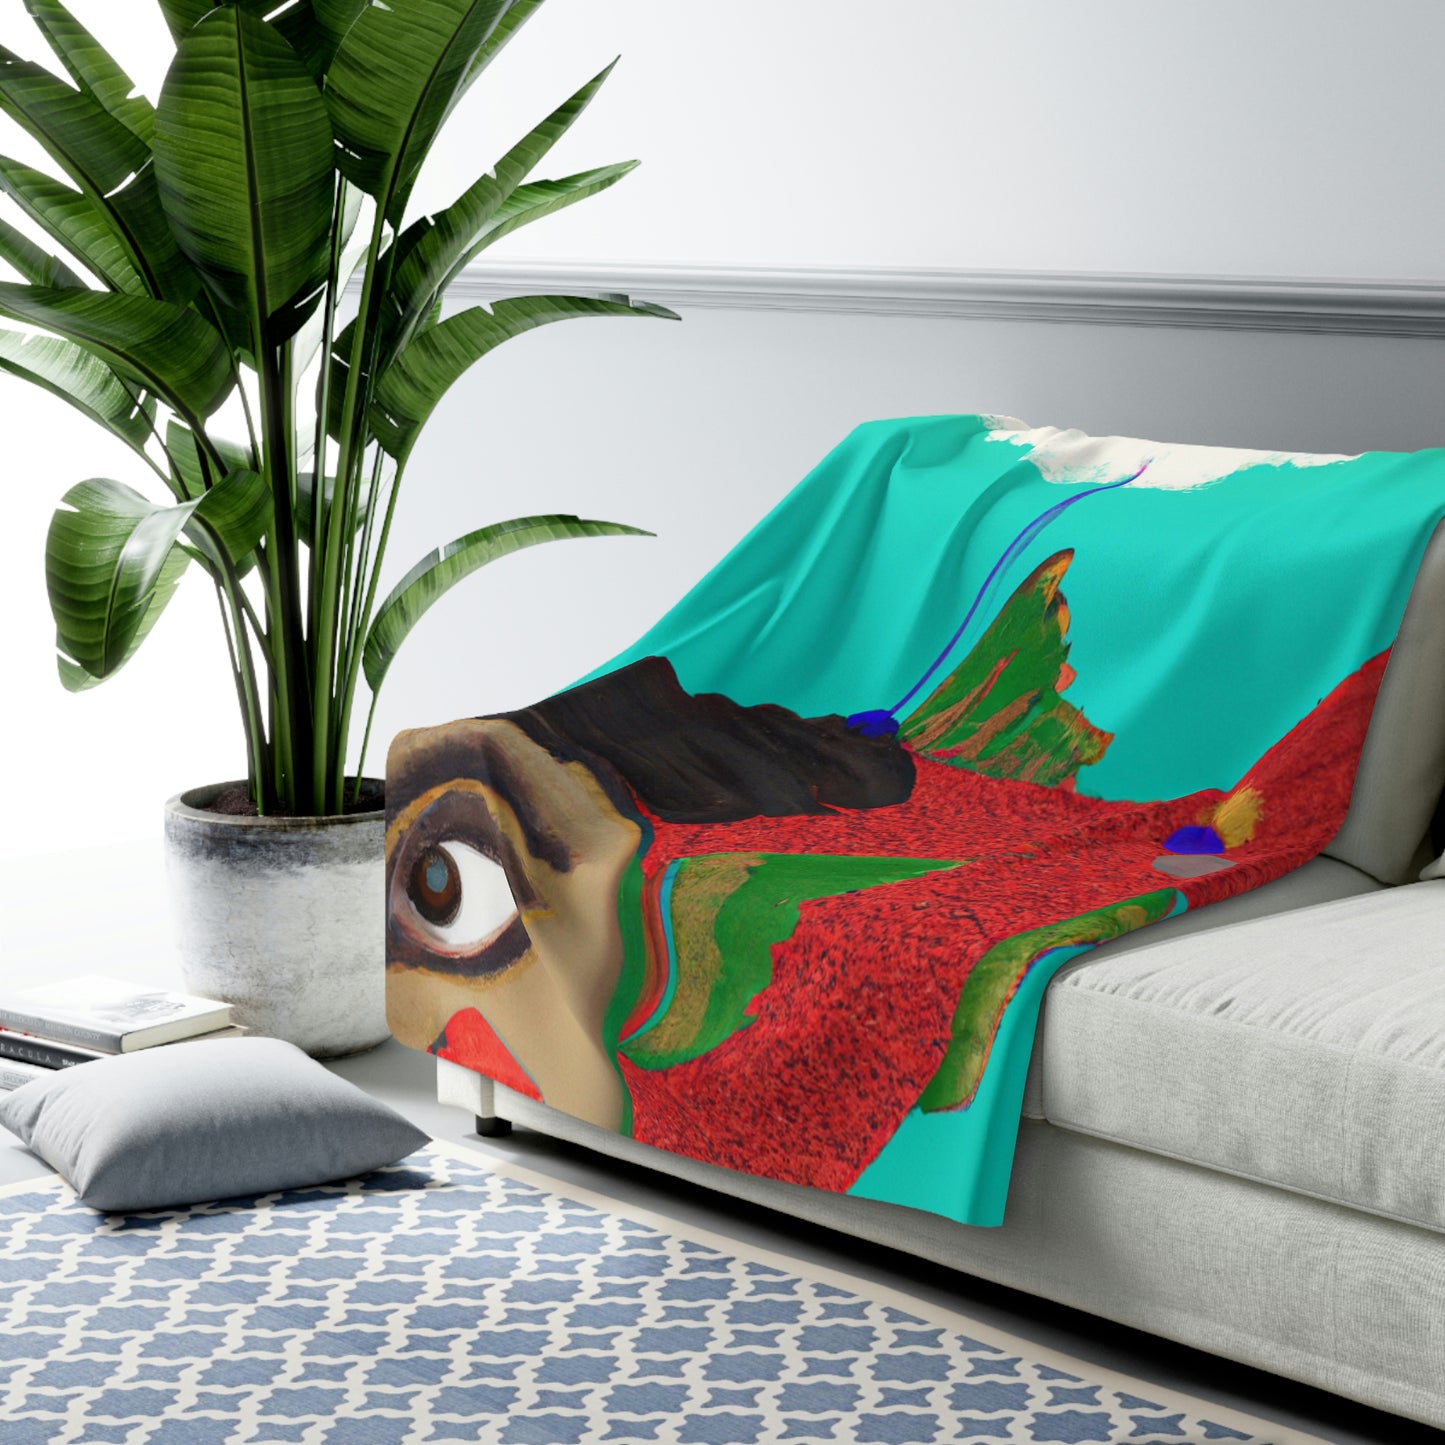 The Mysterious Flying Fish and Its Enigmatic Secret - The Alien Sherpa Fleece Blanket